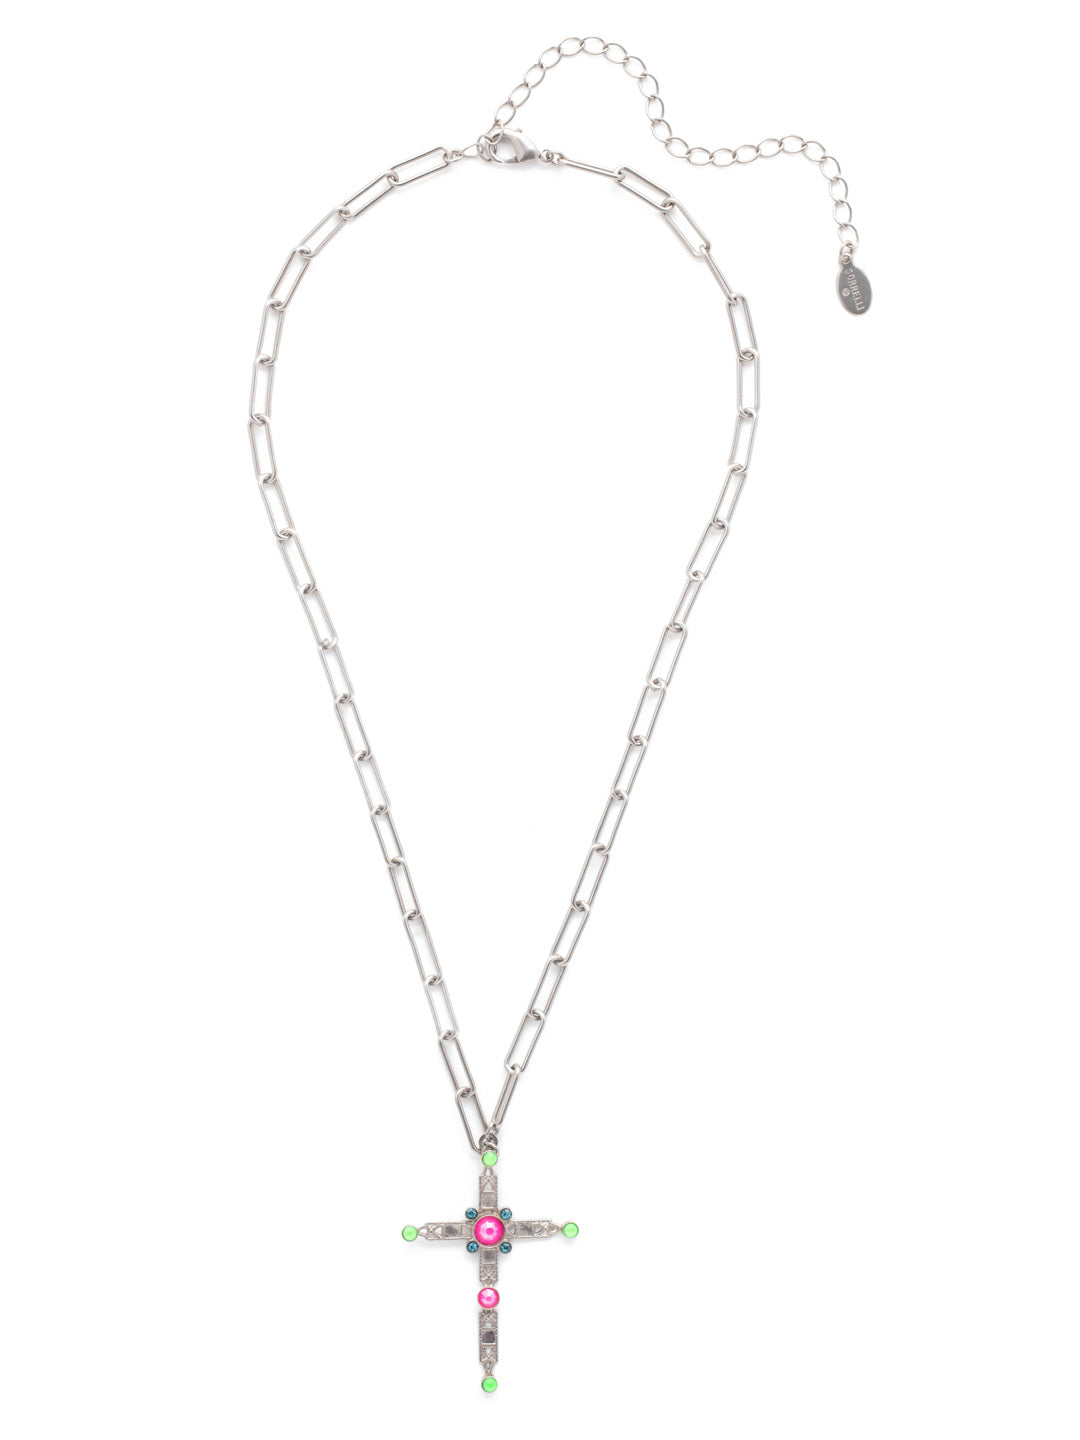 Norah Cross Pendant Necklace - NEX11ASWDW - <p>The Norah Cross Pendant Necklace hosts a modern style cross pendant, overlaid with various crystals and hanging from an adjustable, trendy paperclip chain. From Sorrelli's Wild Watermelon collection in our Antique Silver-tone finish.</p>